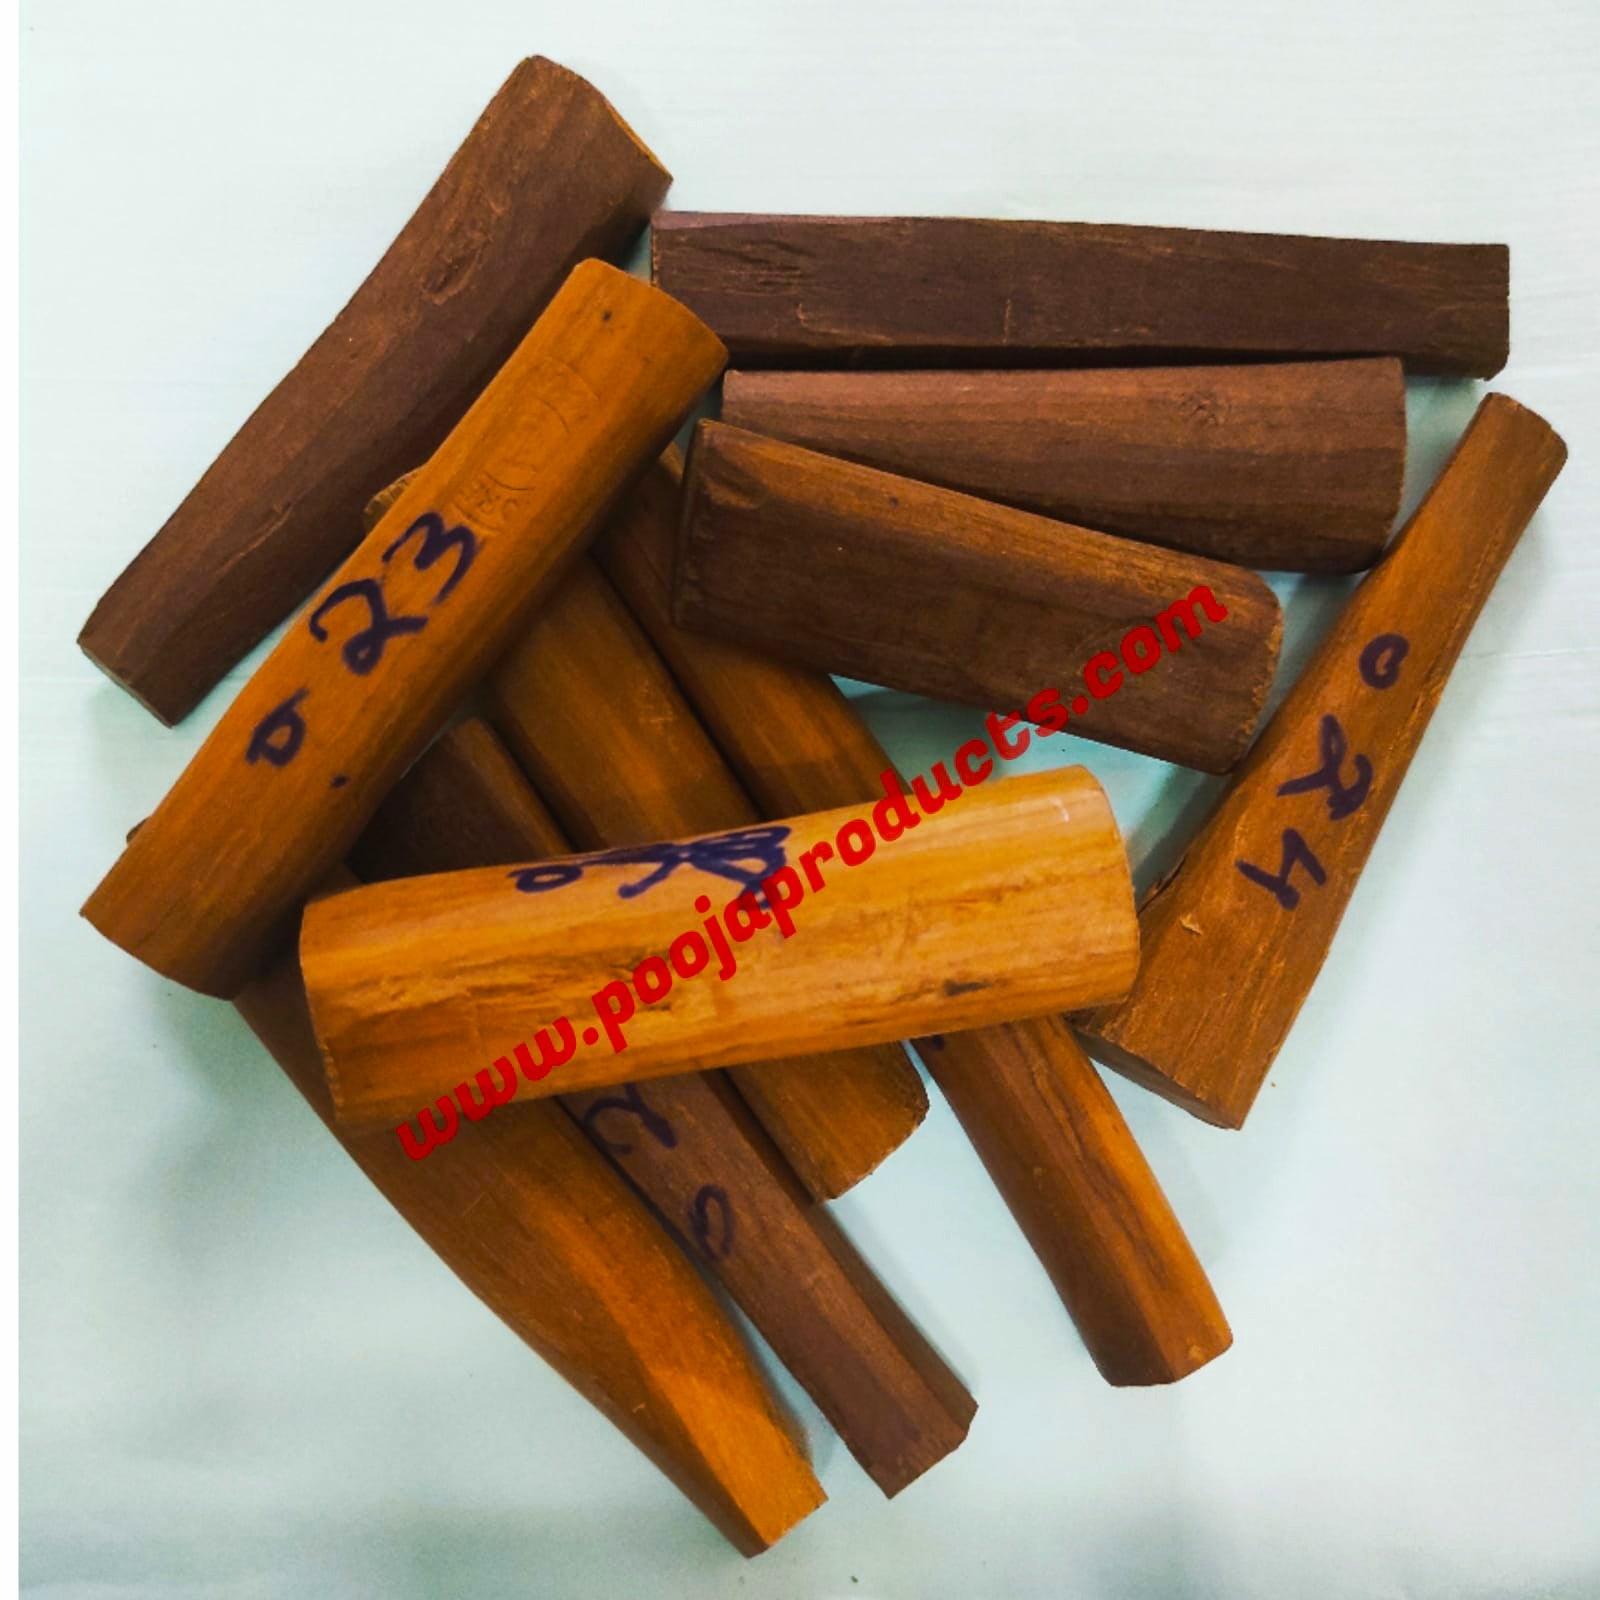 Sandalwood stick  (THIS PRODUCT AVAILABLE ONLY INSIDE INDIA) - PoojaProducts.com